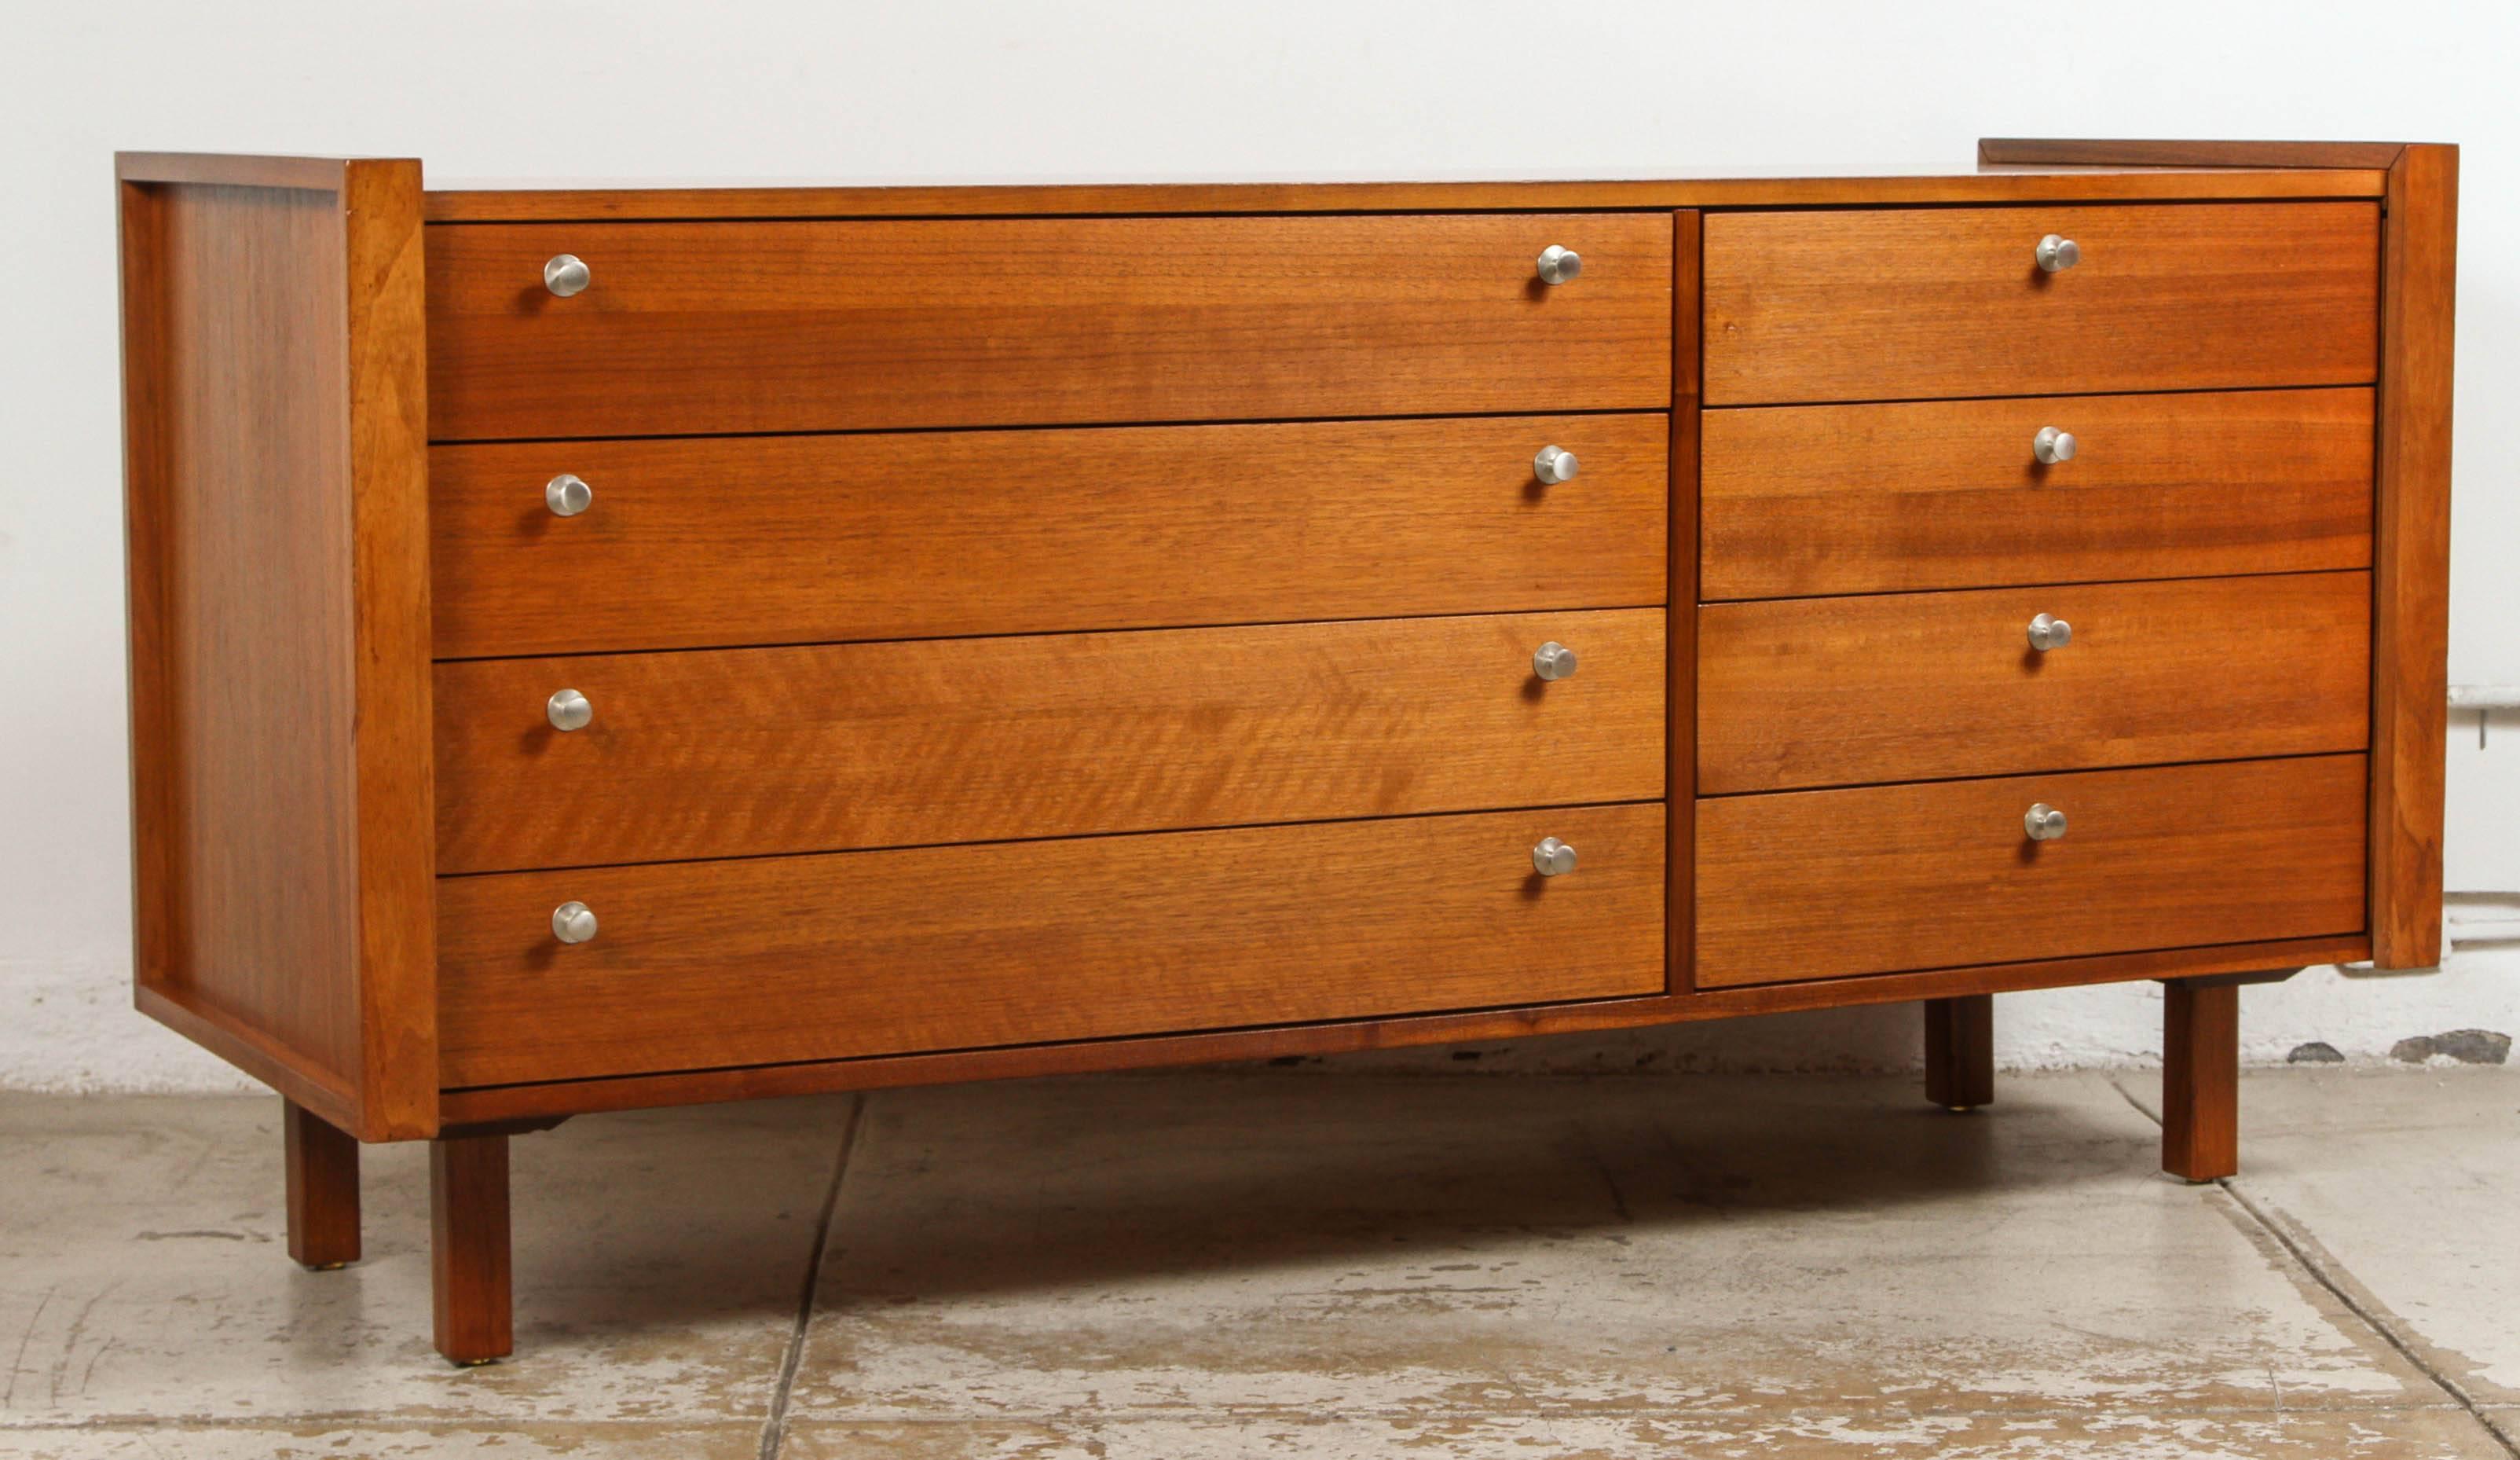 Beautiful condition on this walnut dresser by Martin Borenstein for Brown Saltman. Two sets of four drawers all functioning perfectly with original hardware. Original factory tag intact on back (see image).